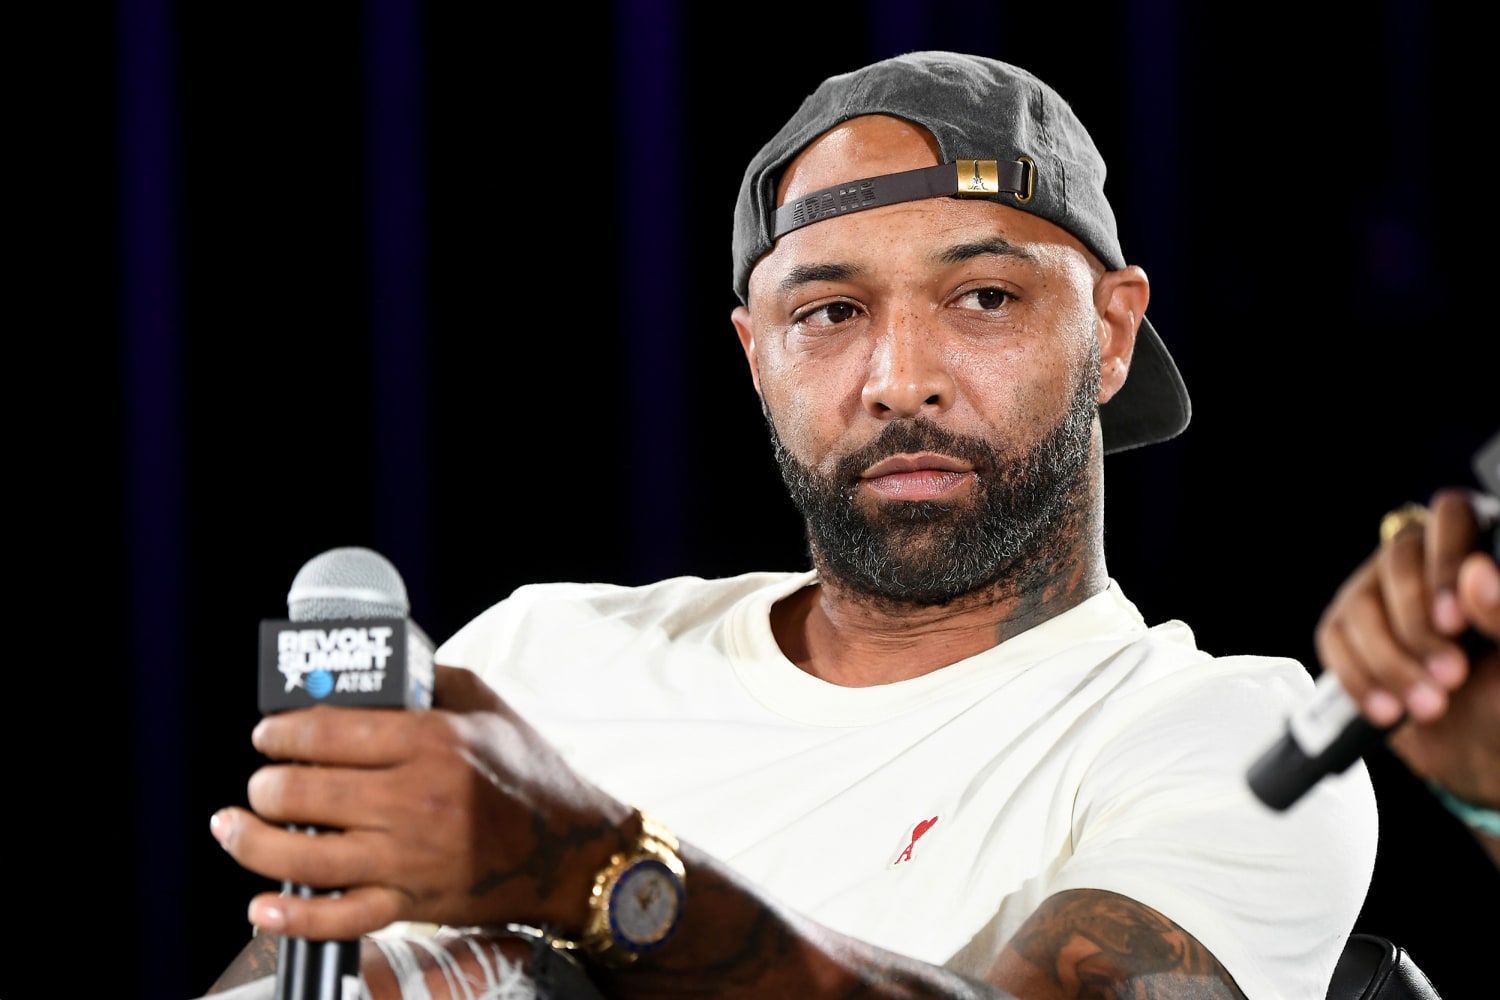 Rapper Joe Budden slammed for saying K pop band BTS is from China. 